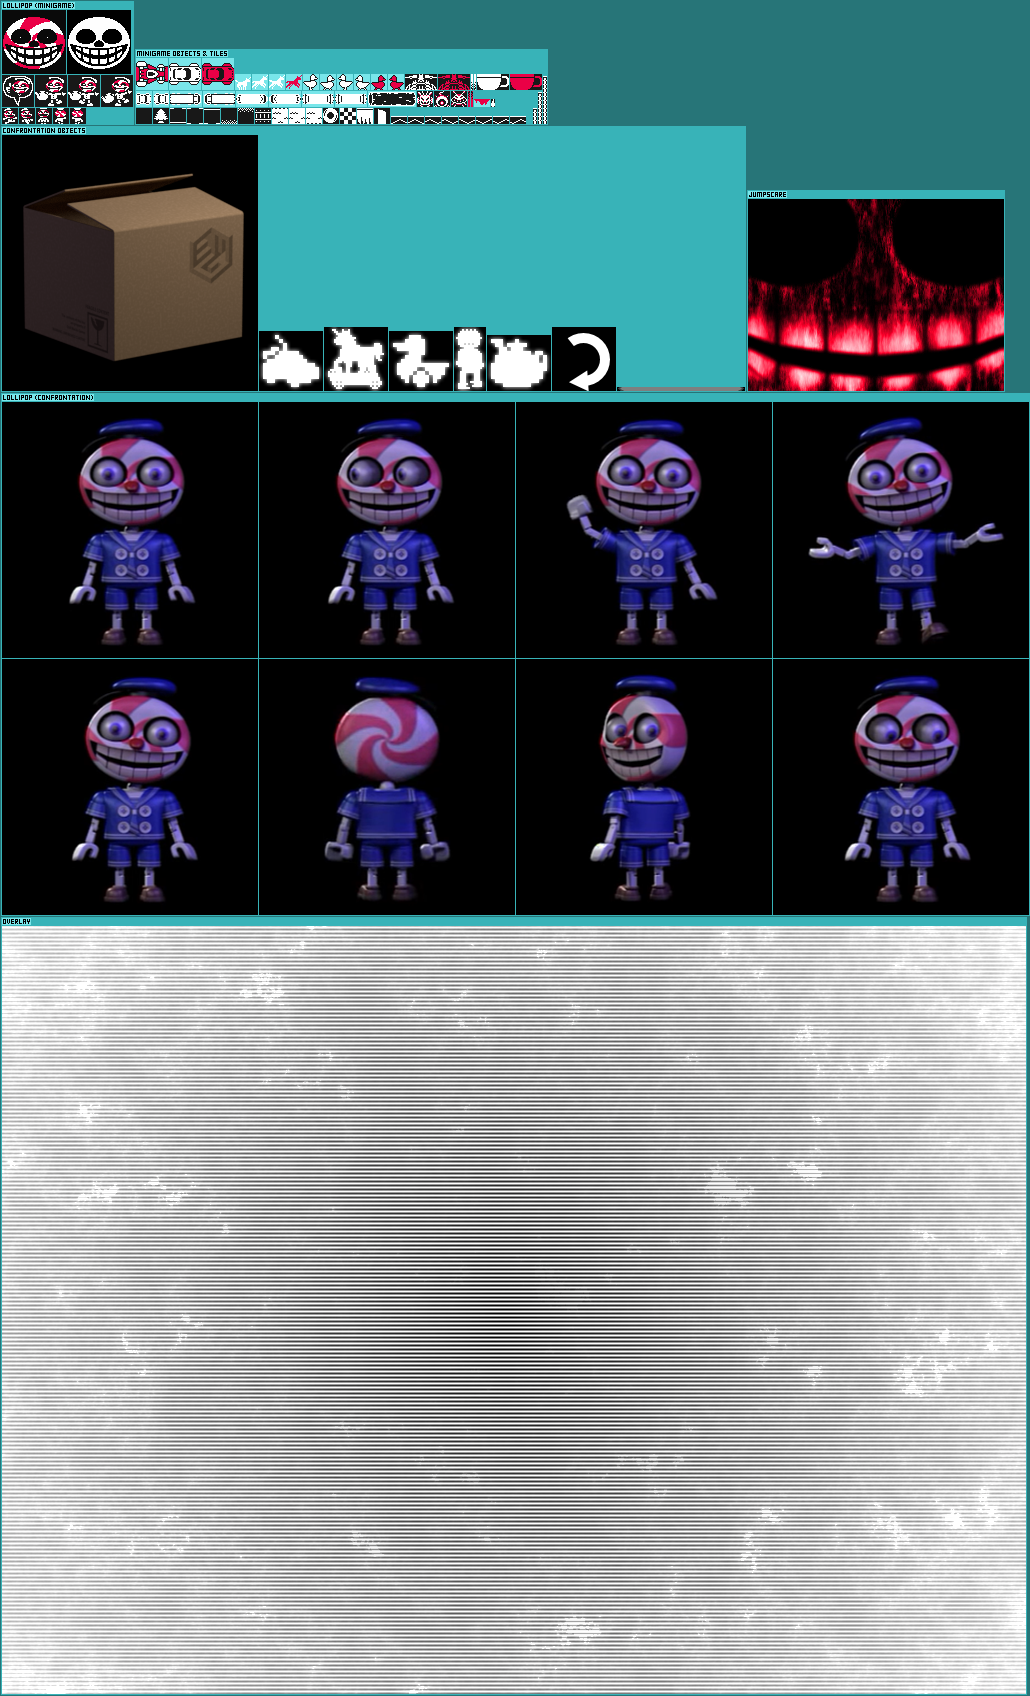 PC / Computer - Five Nights at Candy's 3 - Candy's Adventure - The Spriters  Resource